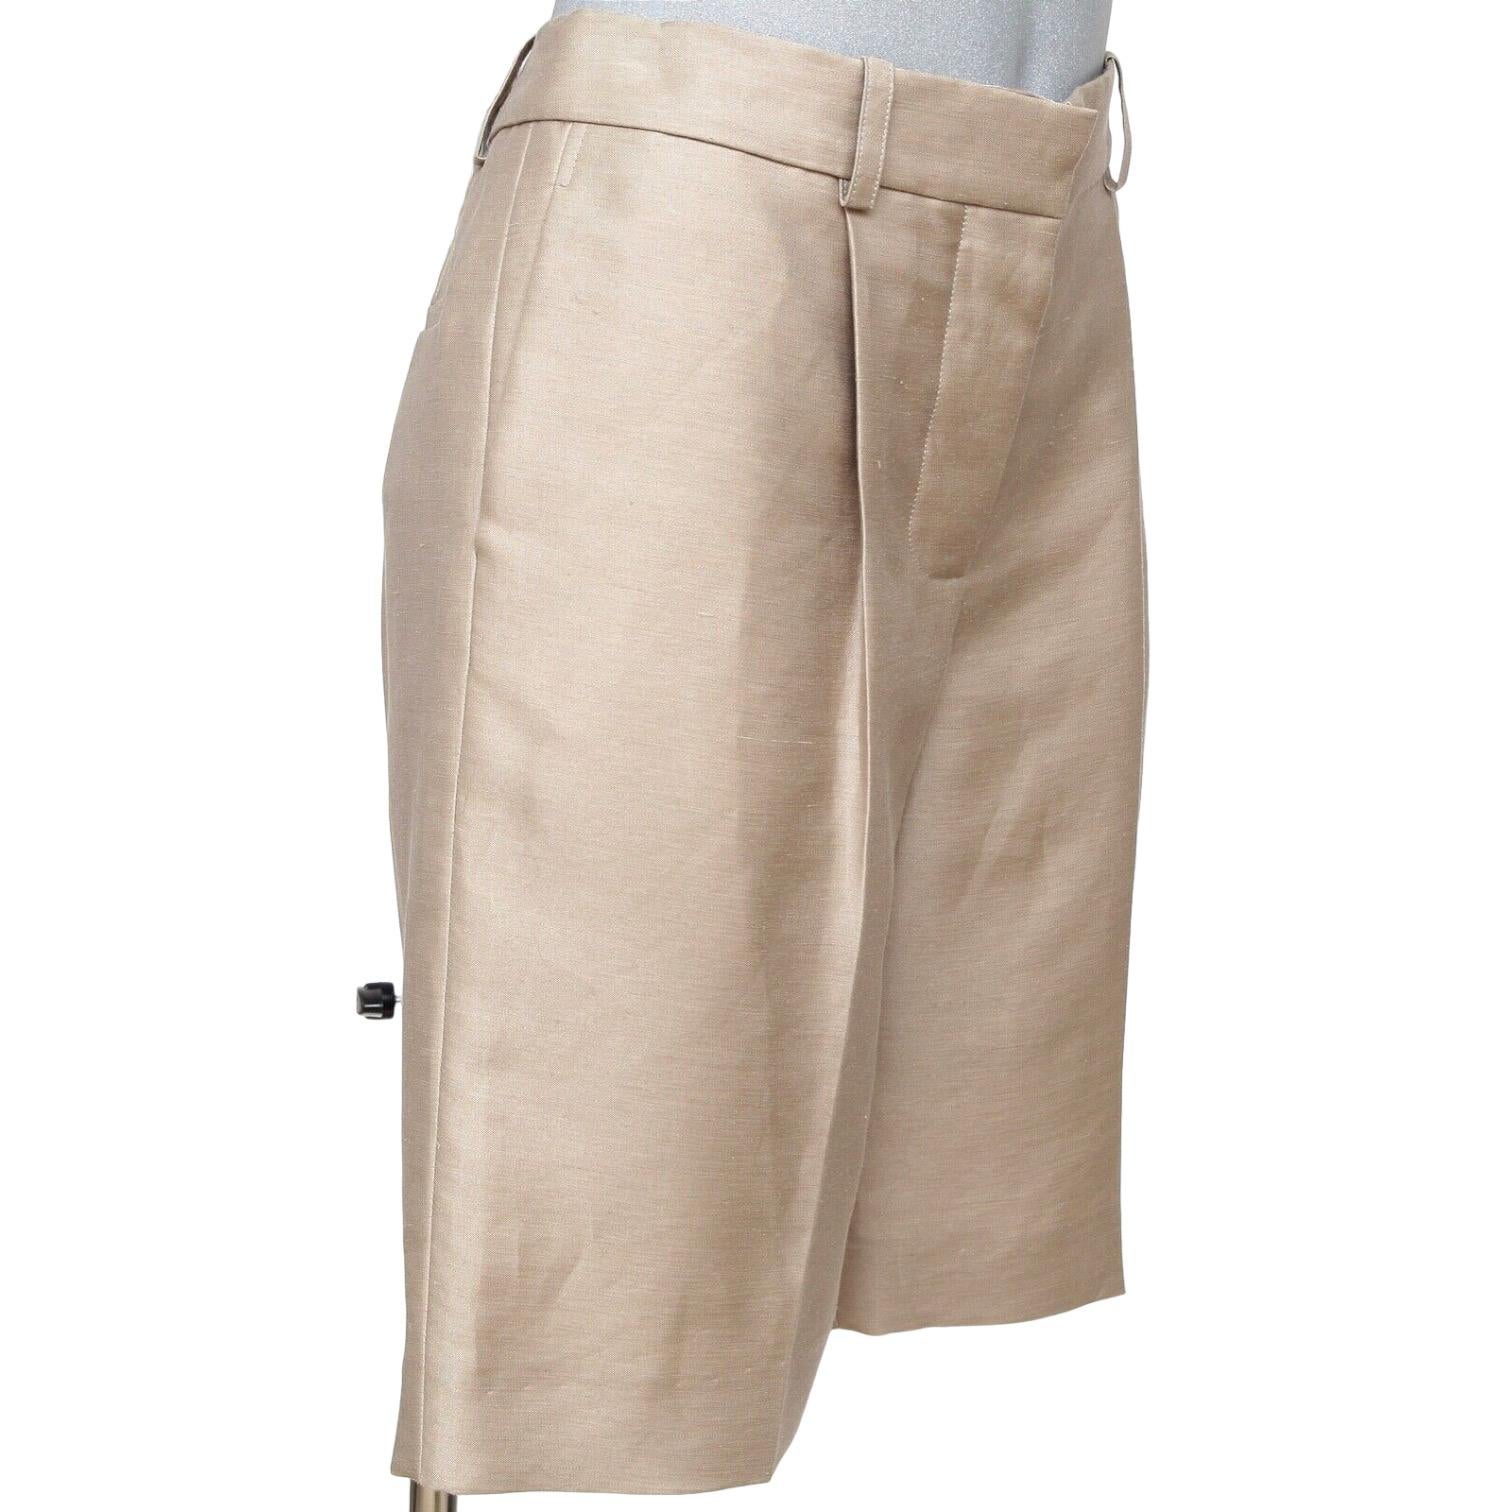 GUARANTEED AUTHENTIC CHLOE SPRING 2008 COLLECTION DARK BEIGE LINEN COTTON BLEND KNEE-LENGTH WALKING SHORTS


Details:
o Dark beige walking shorts in a comfortable linen cotton blend.
o Pleated front.
o Side pockets.
o Covered button and hook